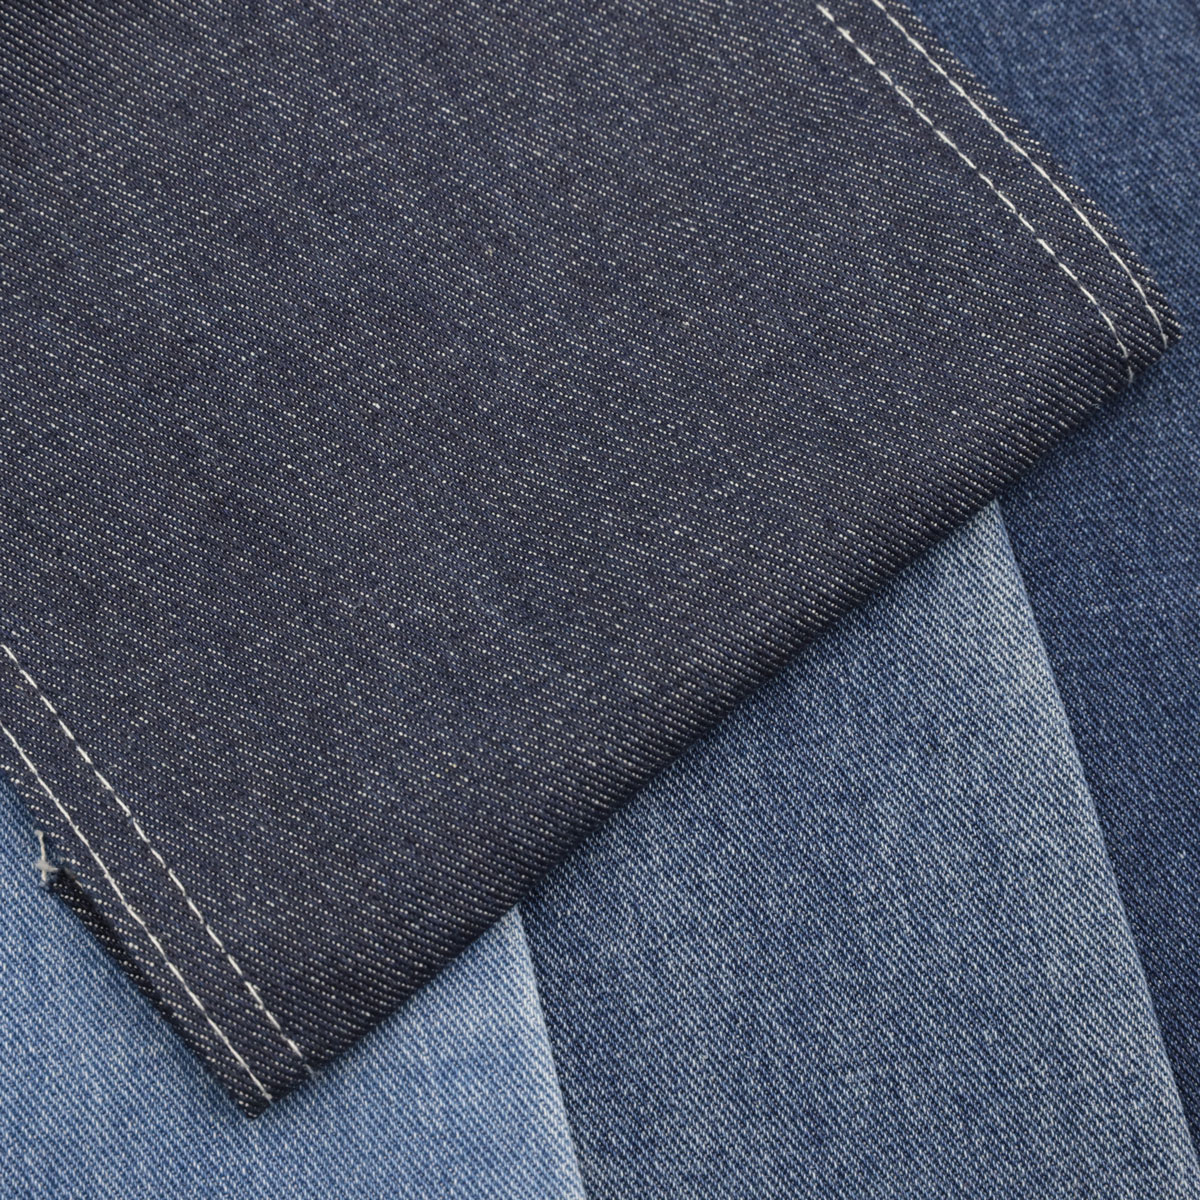 A Simple Way to Have the Best Non-stretch Denim Options 1